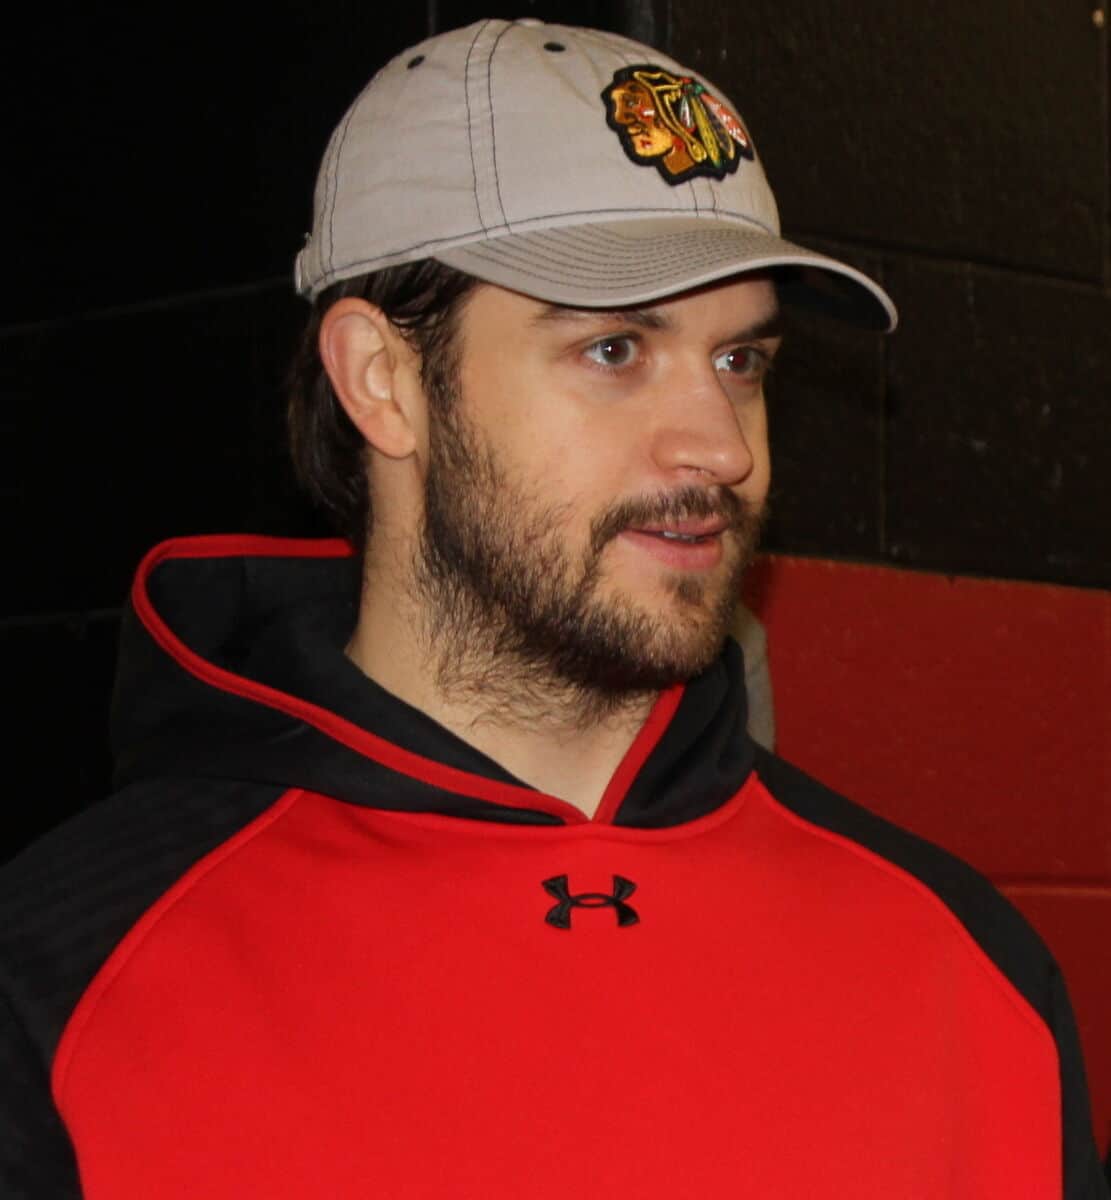 Brent Seabrook - Famous Athlete